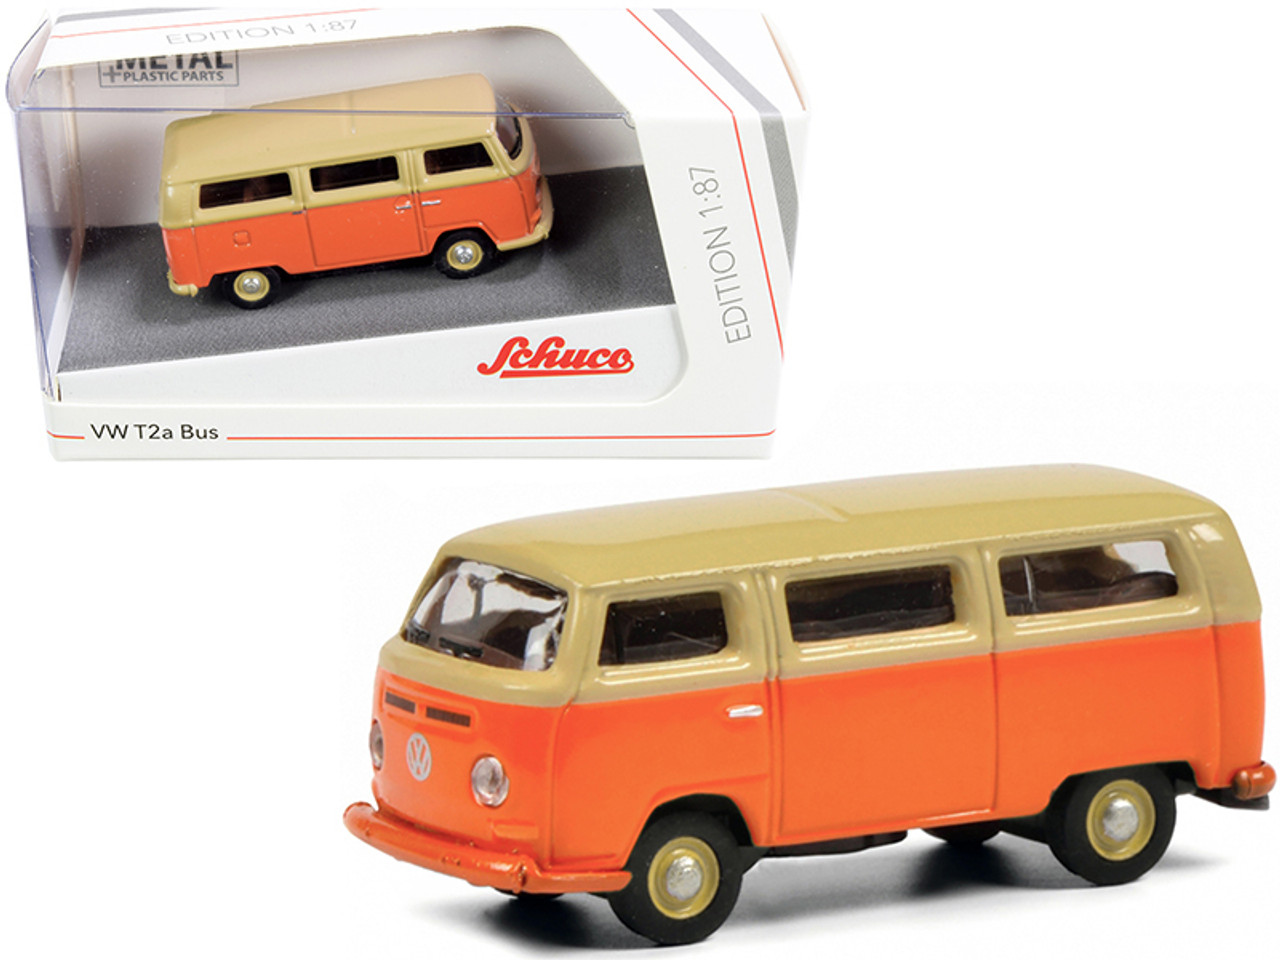 Volkswagen T2a Bus Orange and Yellow 1/87 (HO) Diecast Model by Schuco